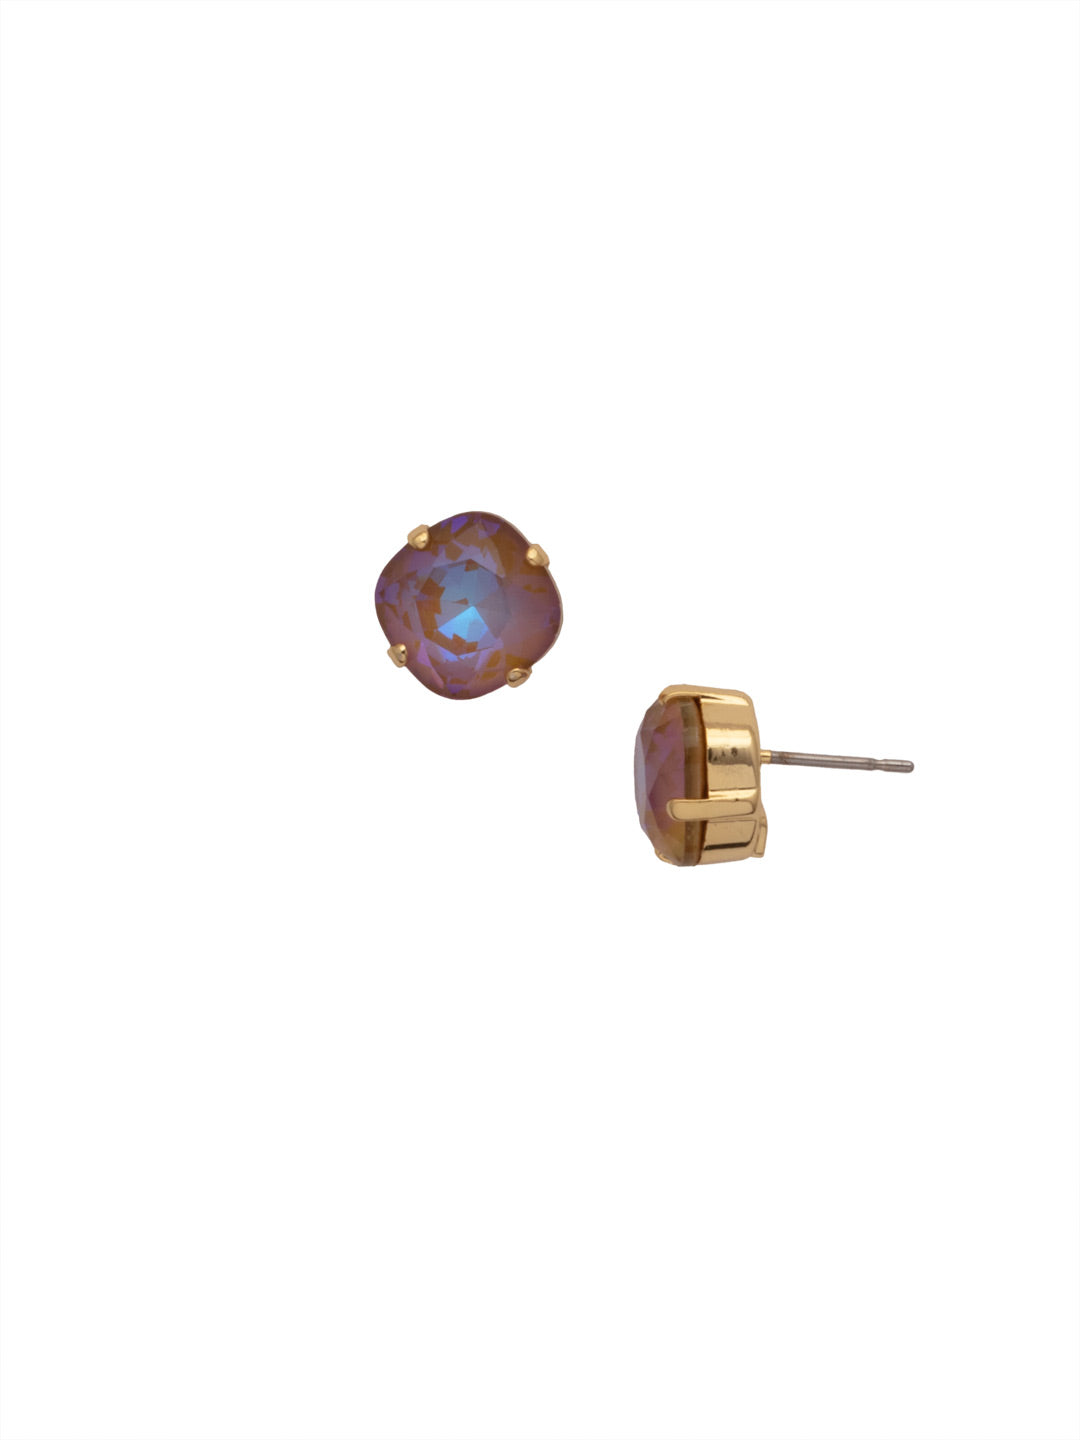 Halcyon Stud Earrings - EDH25BGRSU - <p>A beautiful, luminous cushion-cut crystal in a classic four-pronged setting that's ideal for everyday wear. From Sorrelli's Raw Sugar collection in our Bright Gold-tone finish.</p>